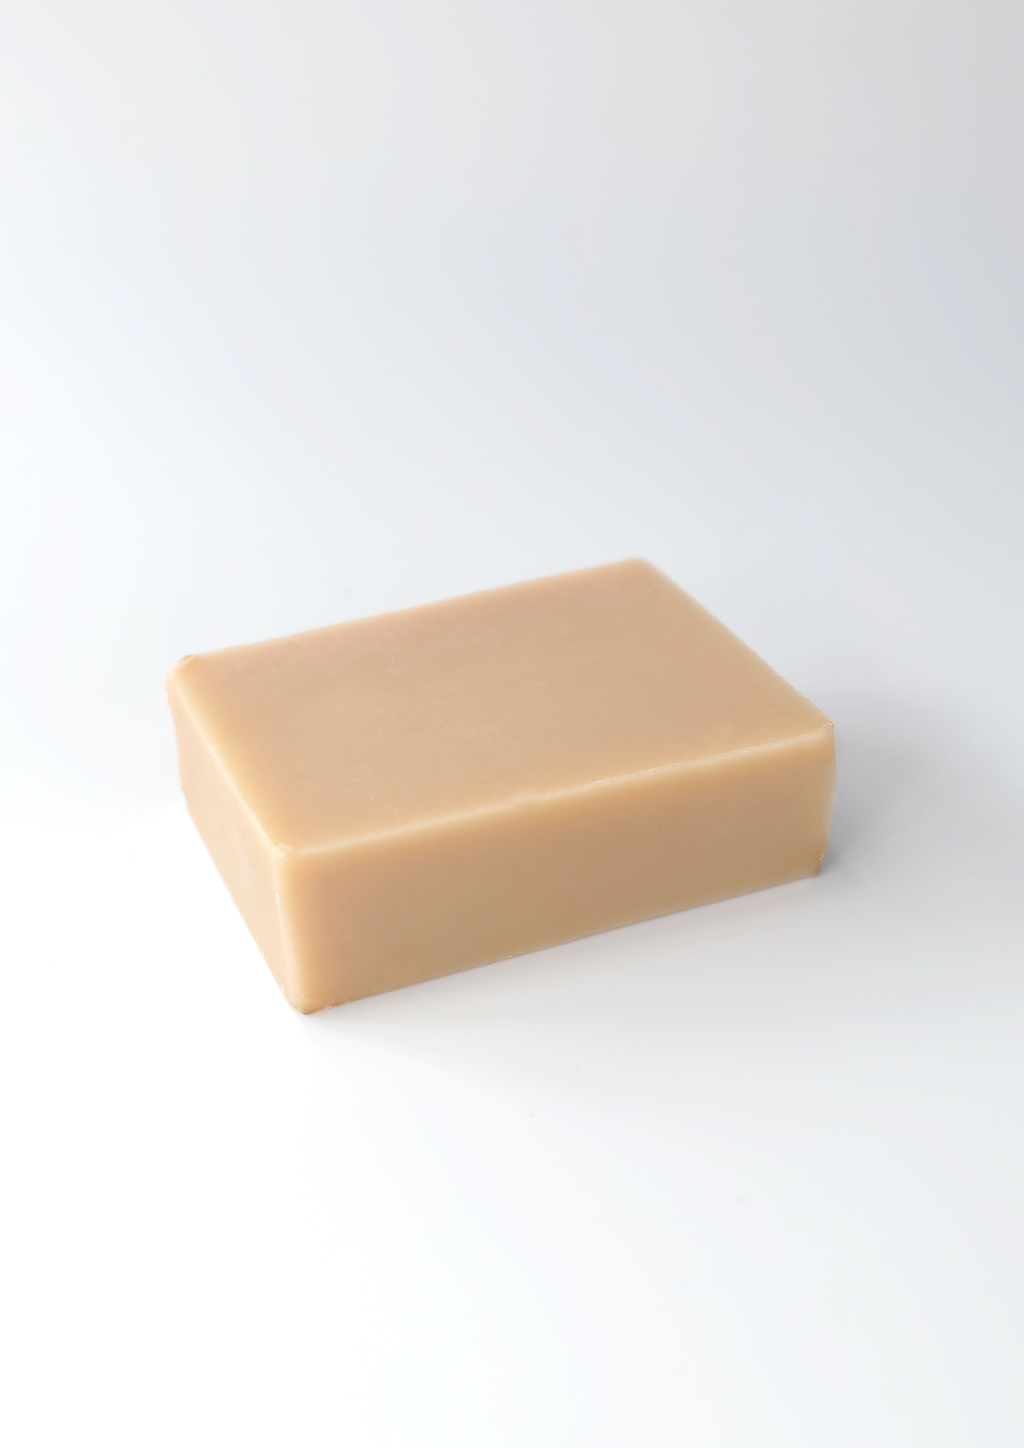 Coraline Skincare Rosy Radiance Soap. Organic soap. The pink soap bar is pictured alone on a plain white background.